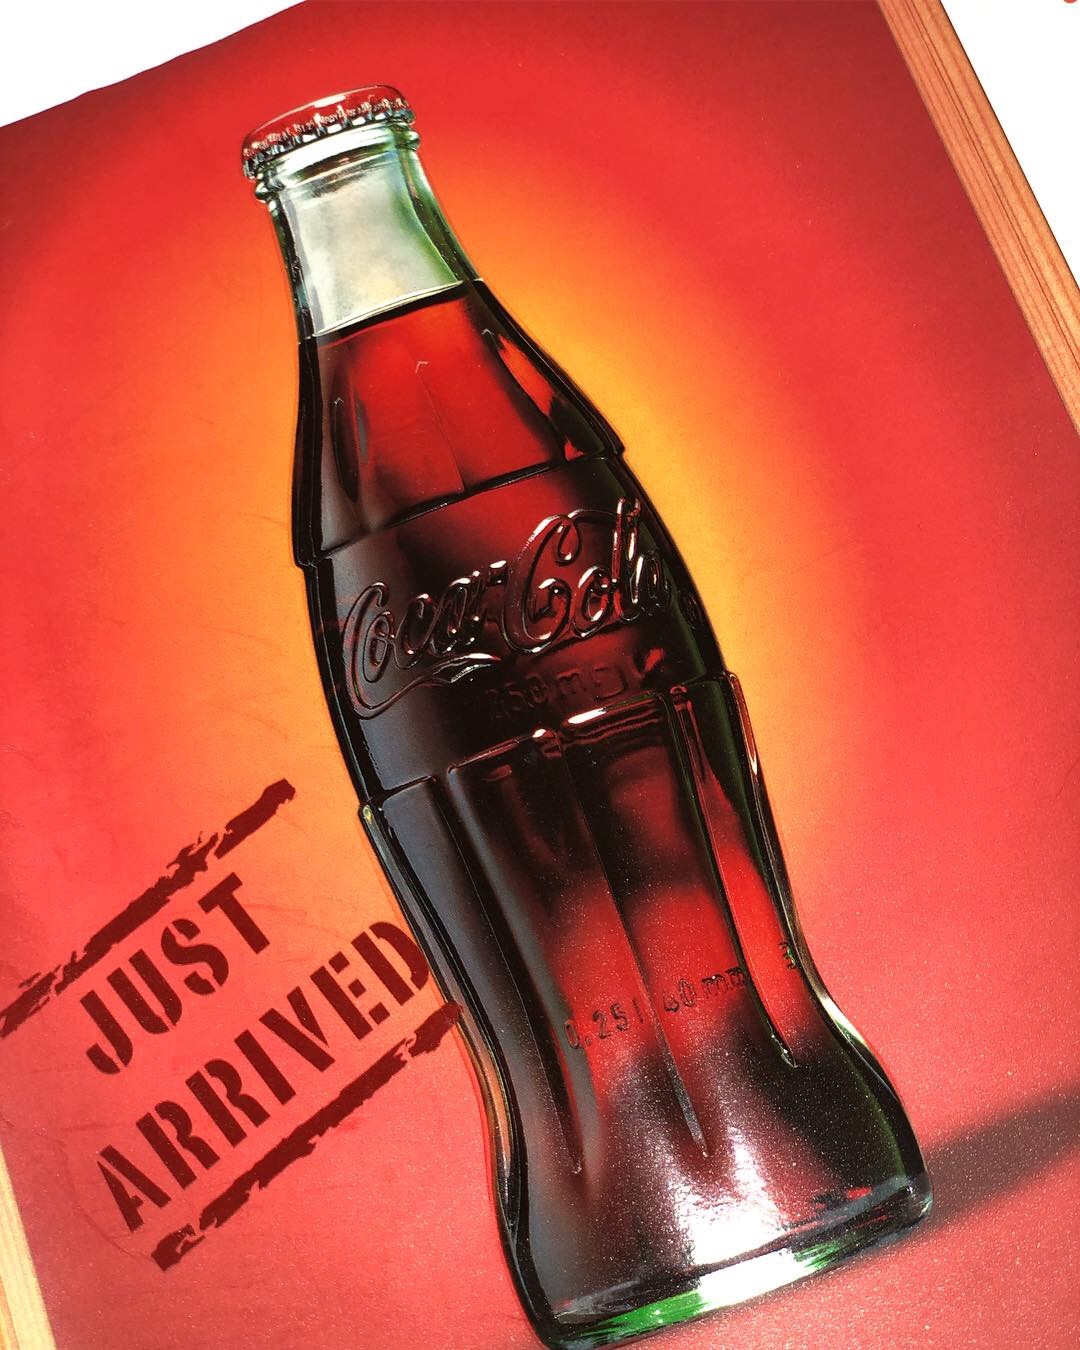 Coca-Cola Tailormade Vintage Leaflet with embossed bottle (internal view)